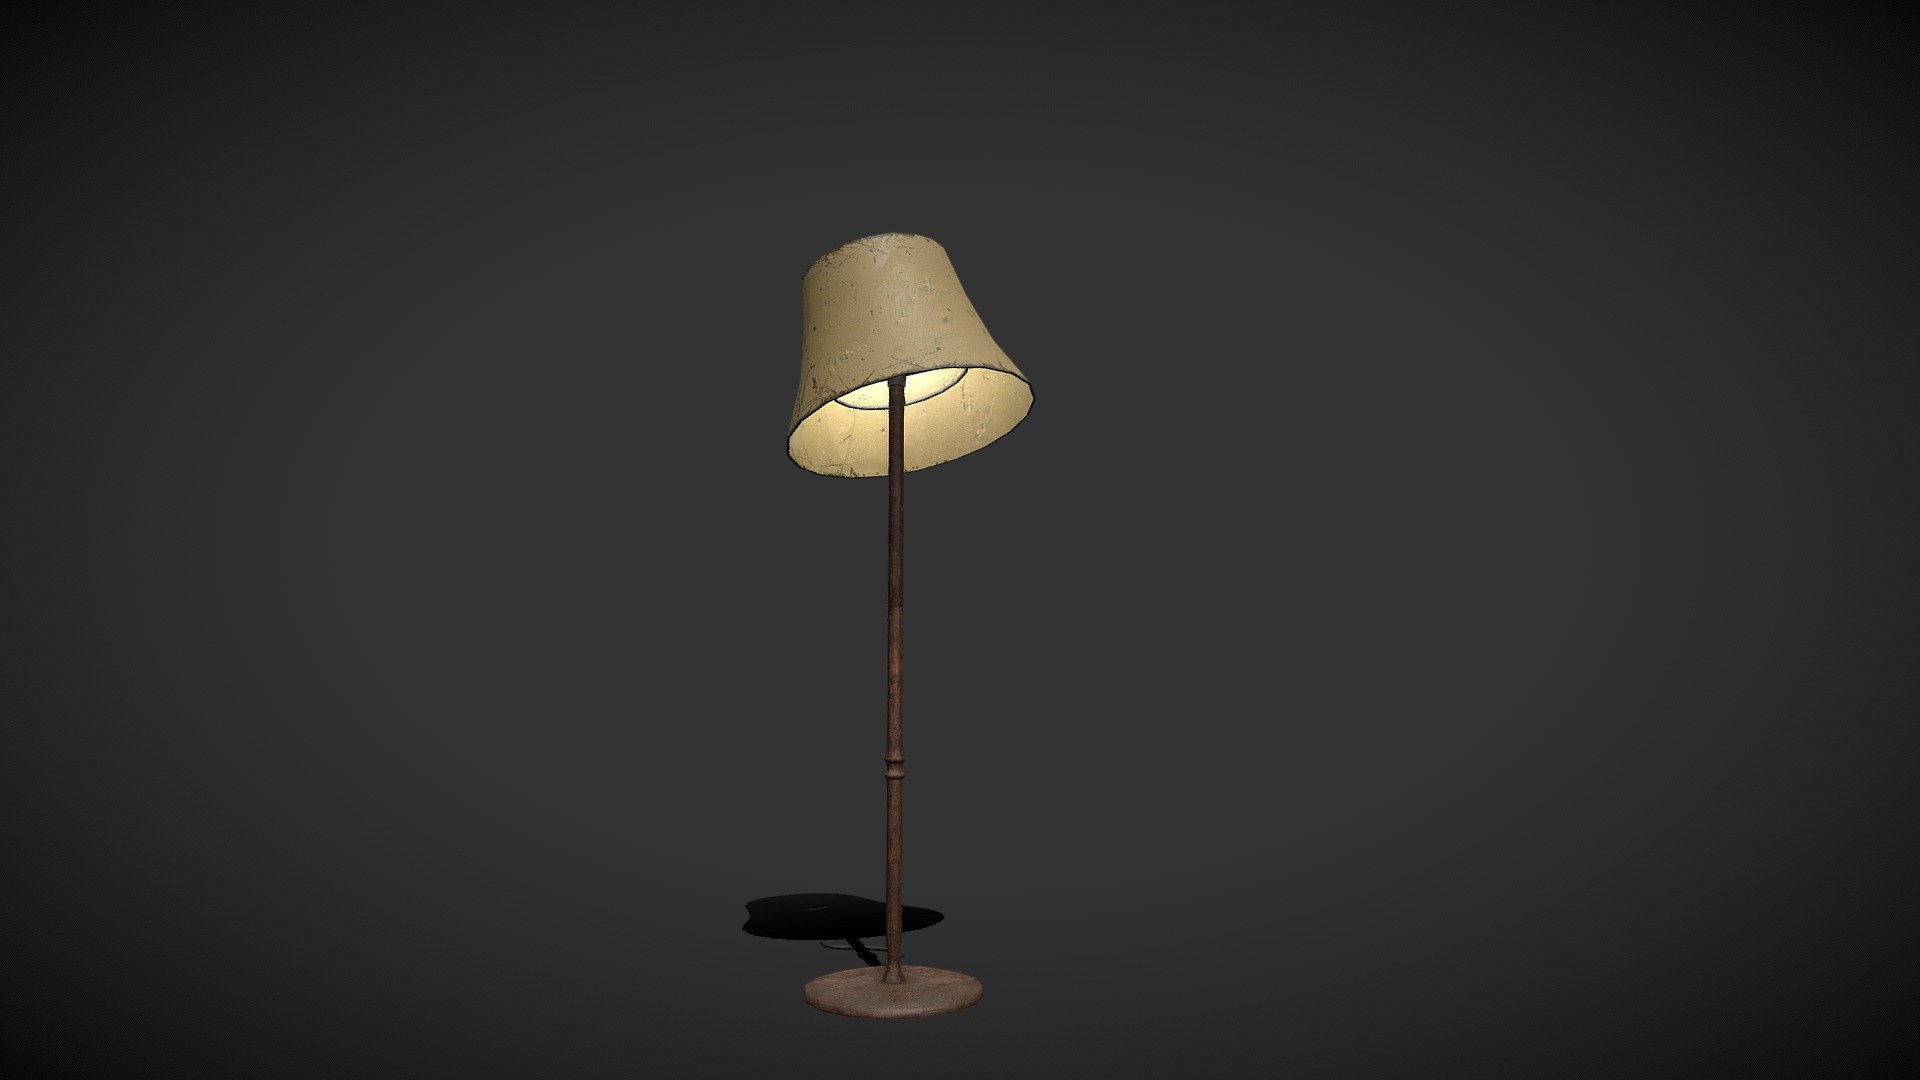 this floor lamp in slanted position offers the perfect ambience for an old mansion

Buy it for 1$ on -link removed- - standard lamp - 3D model by 3DFoxHound 3d model